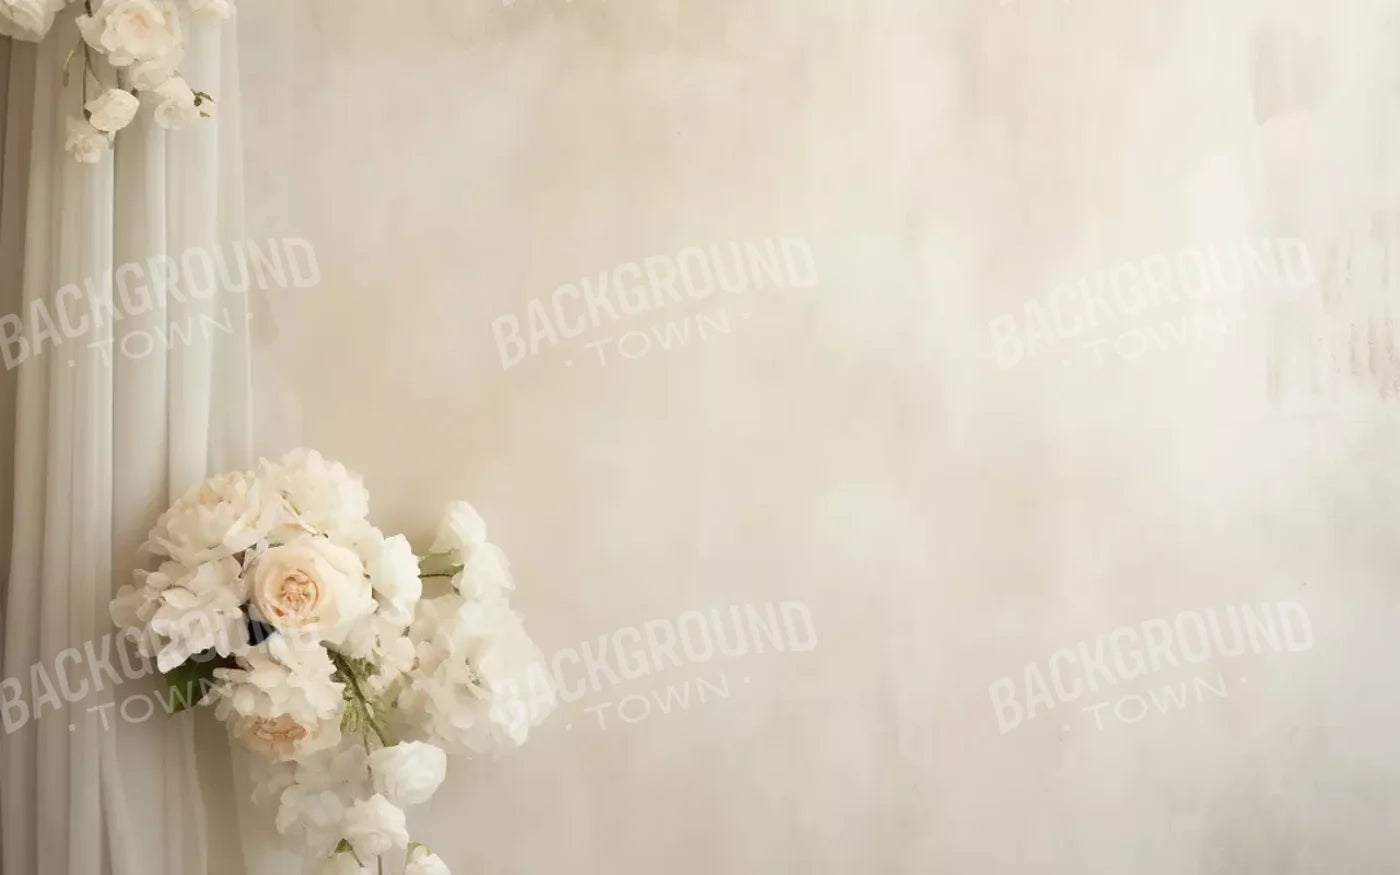 Plaster Wall With Florals 16’X10’ Ultracloth (192 X 120 Inch) Backdrop